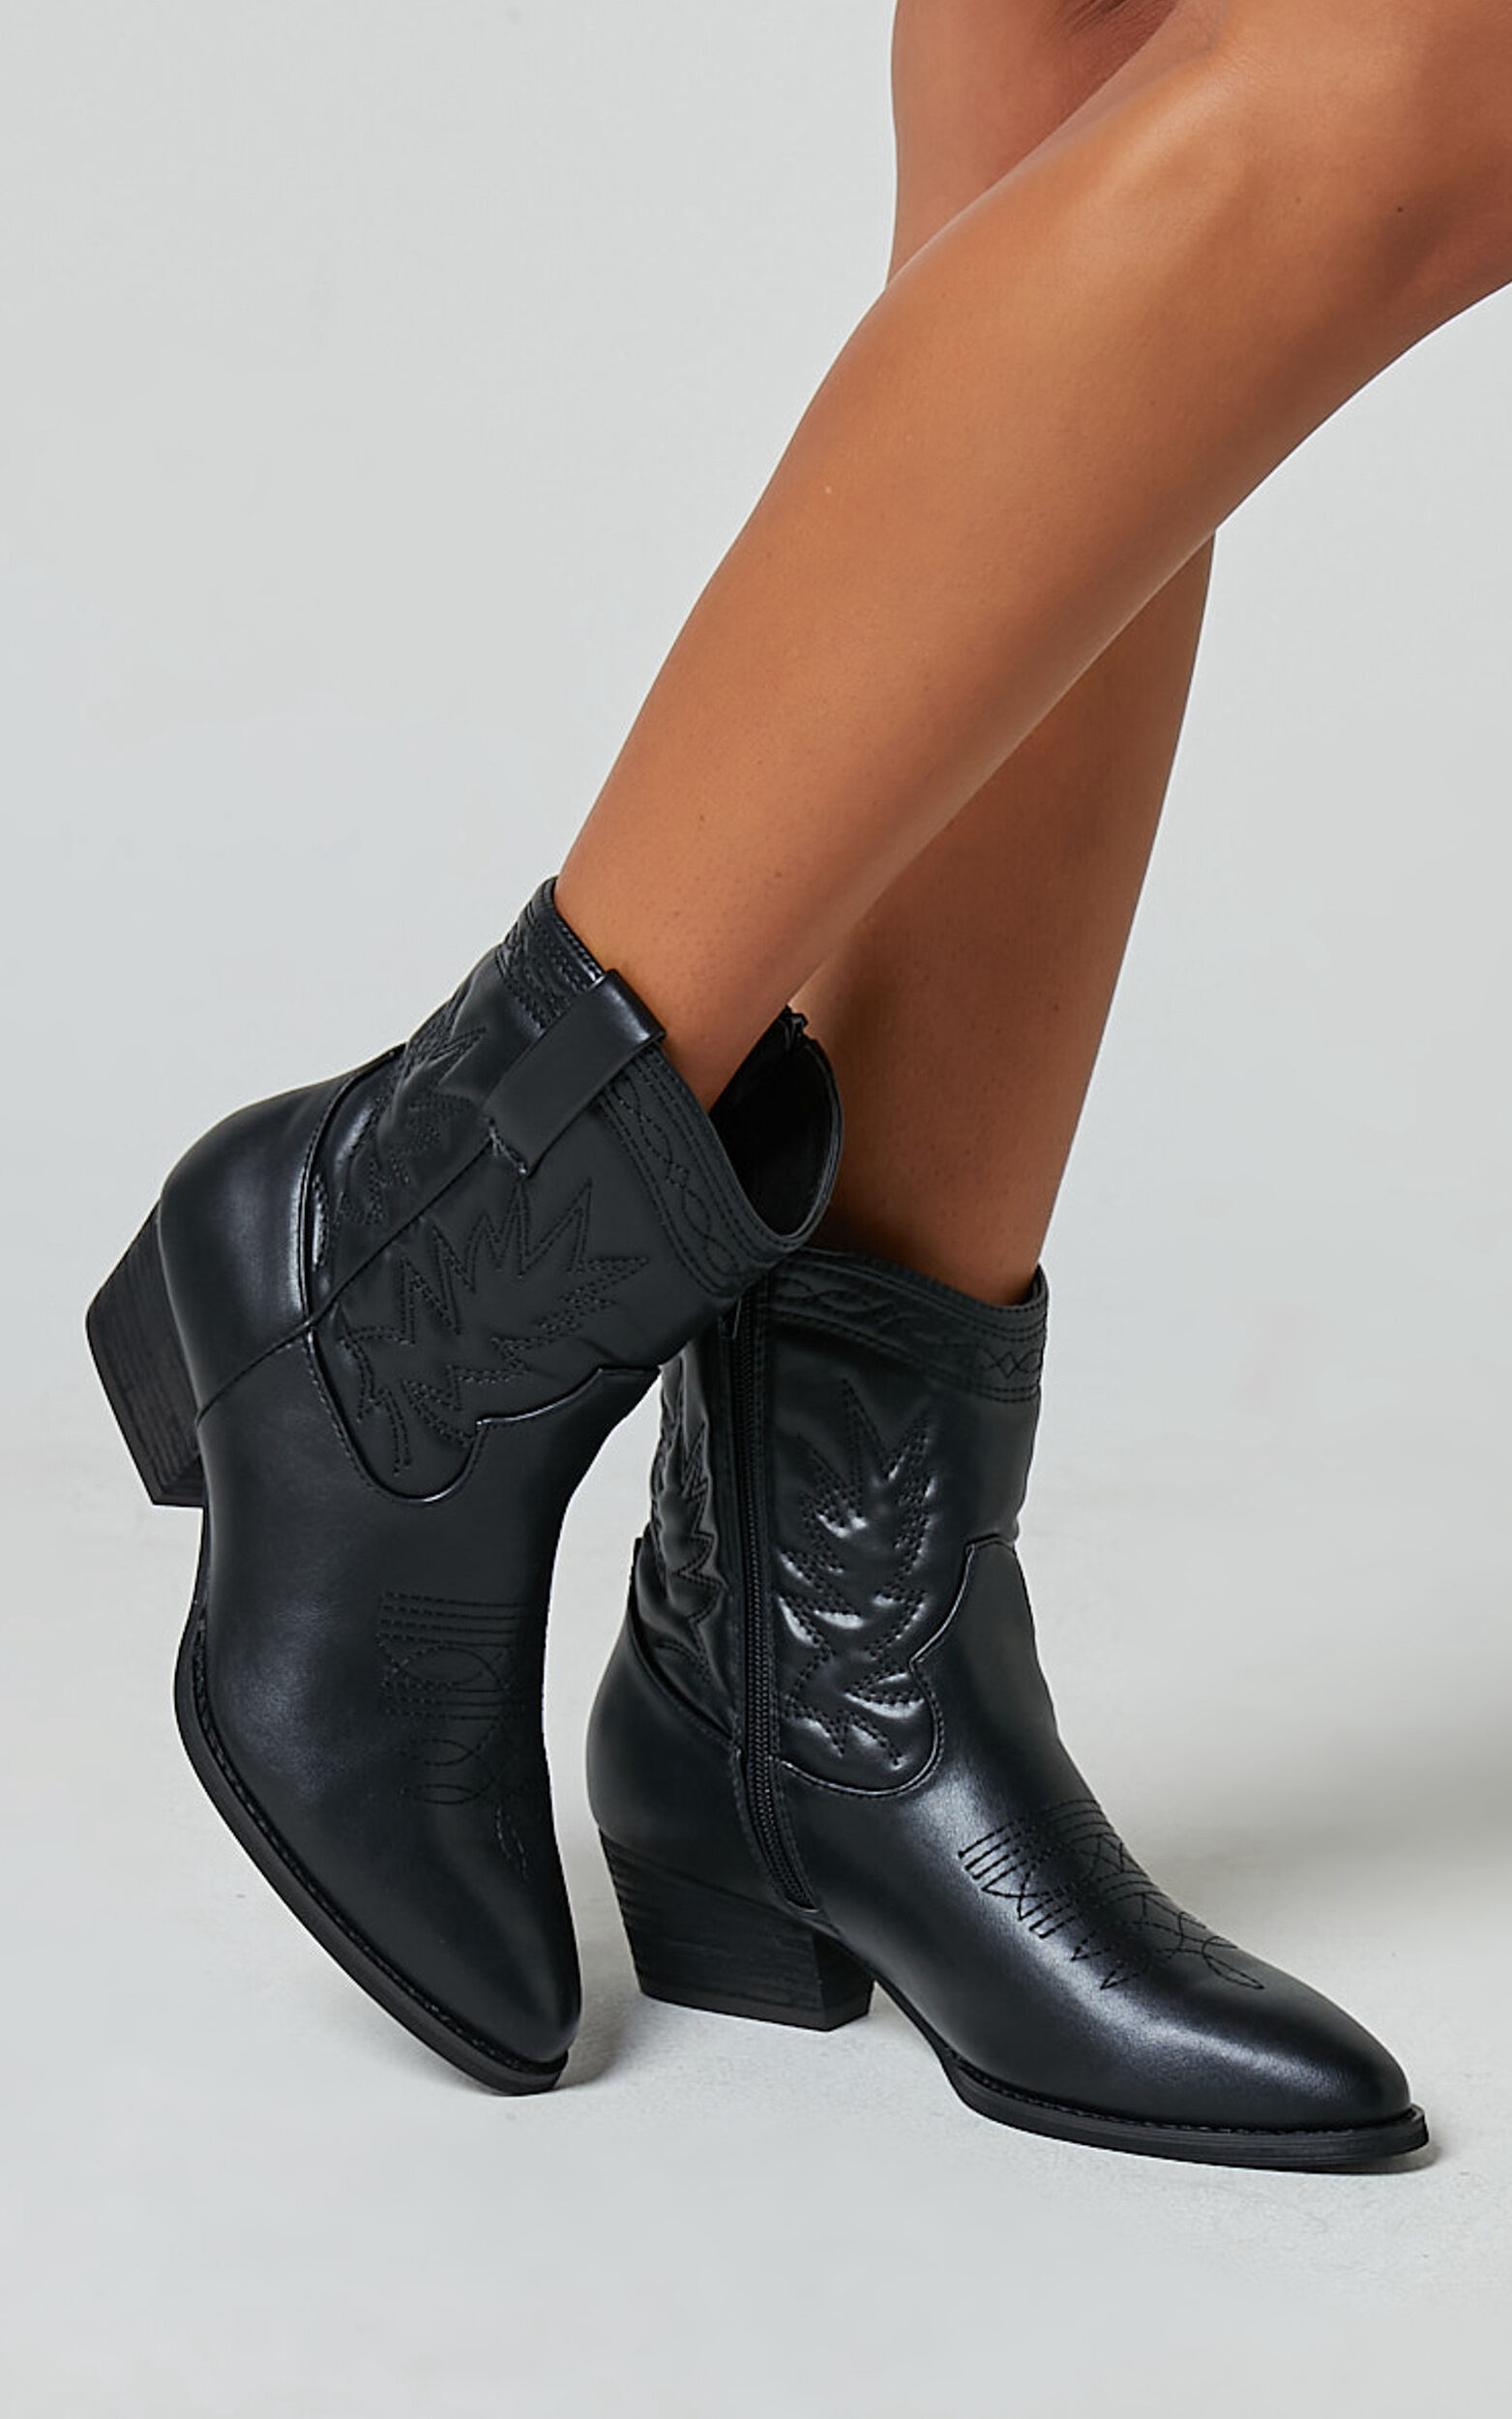 Therapy - Wilder Boots in Black - 05, BLK1